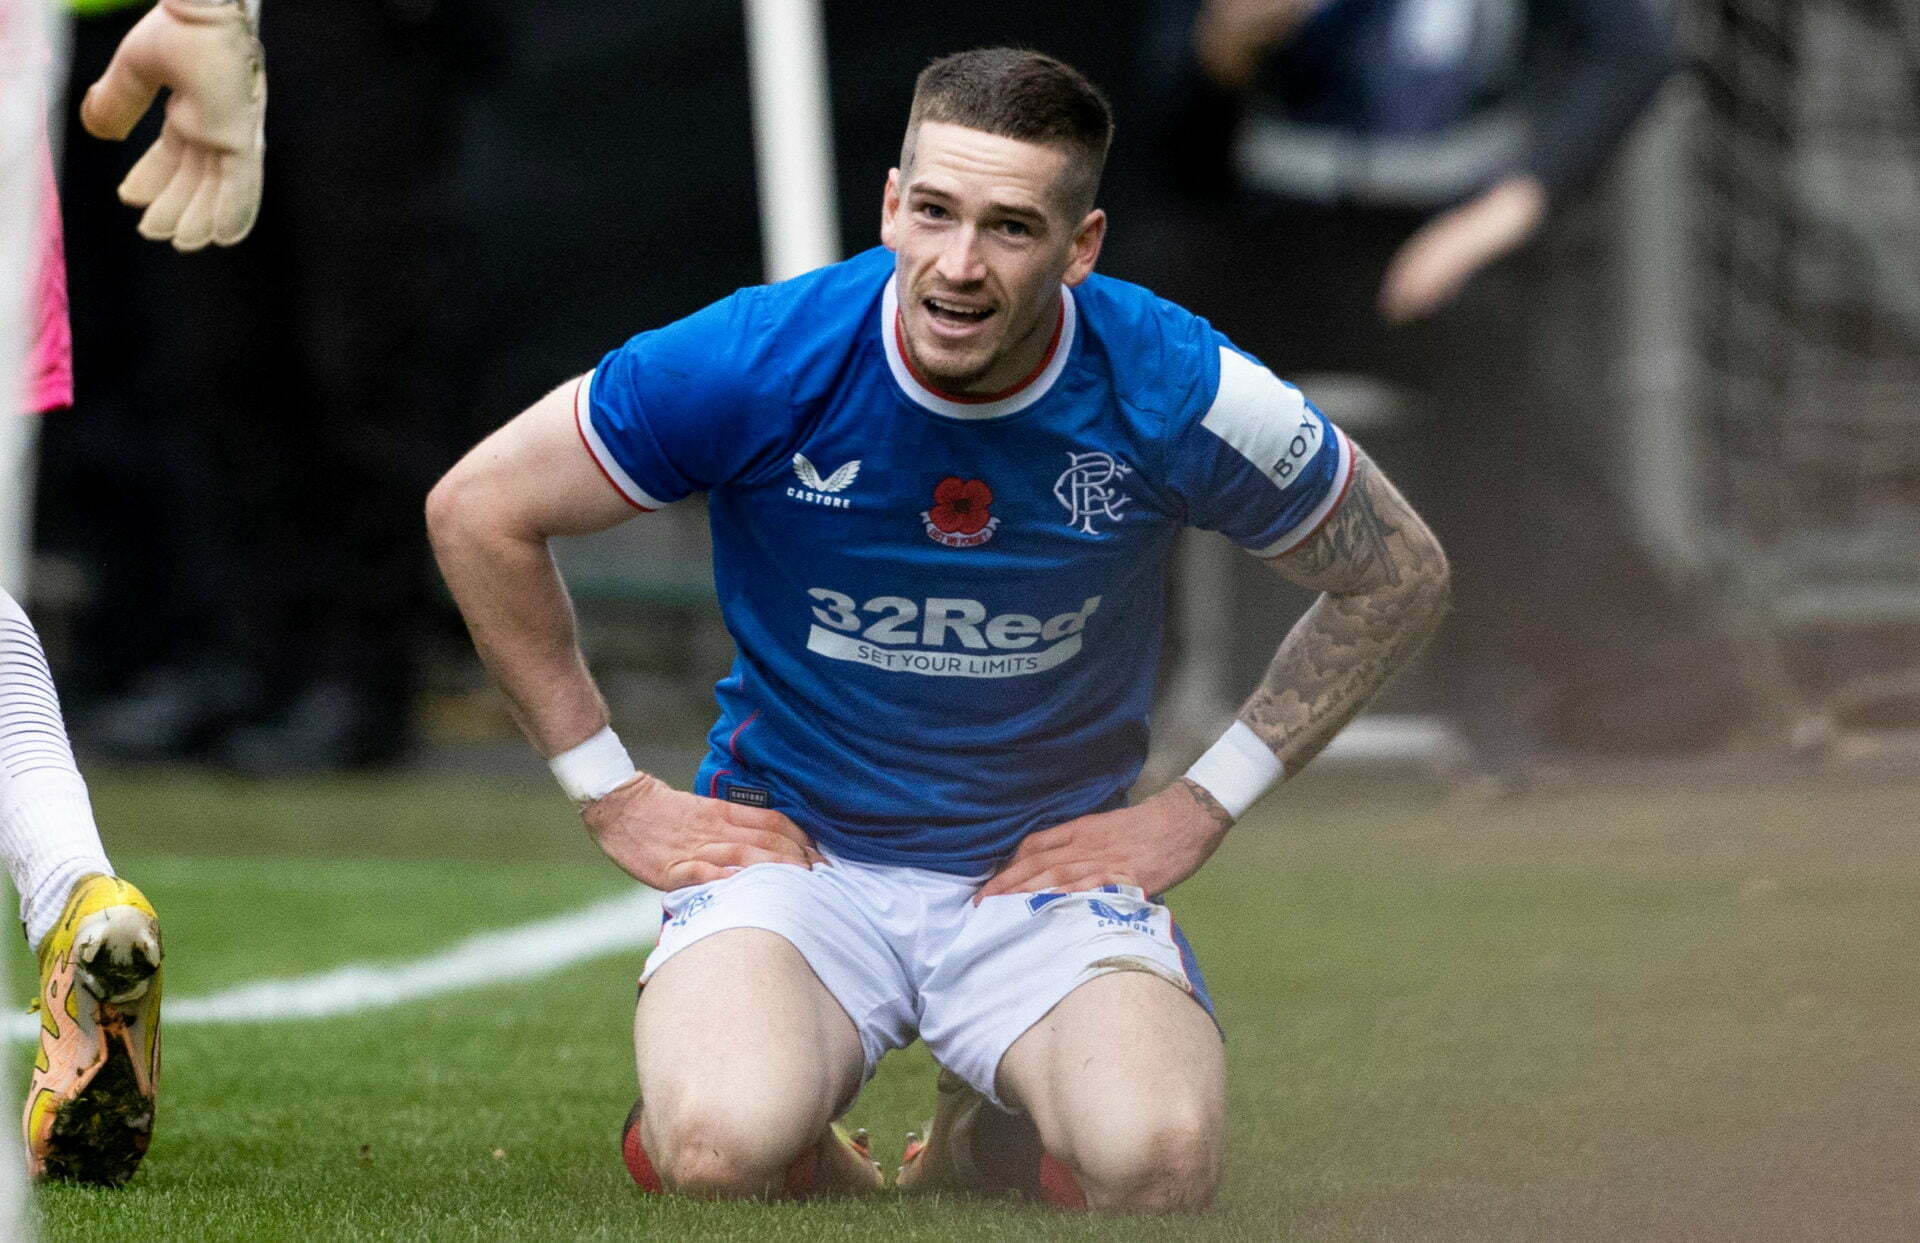 Will Ryan Kent stay and flourish at Rangers under Michael Beale?